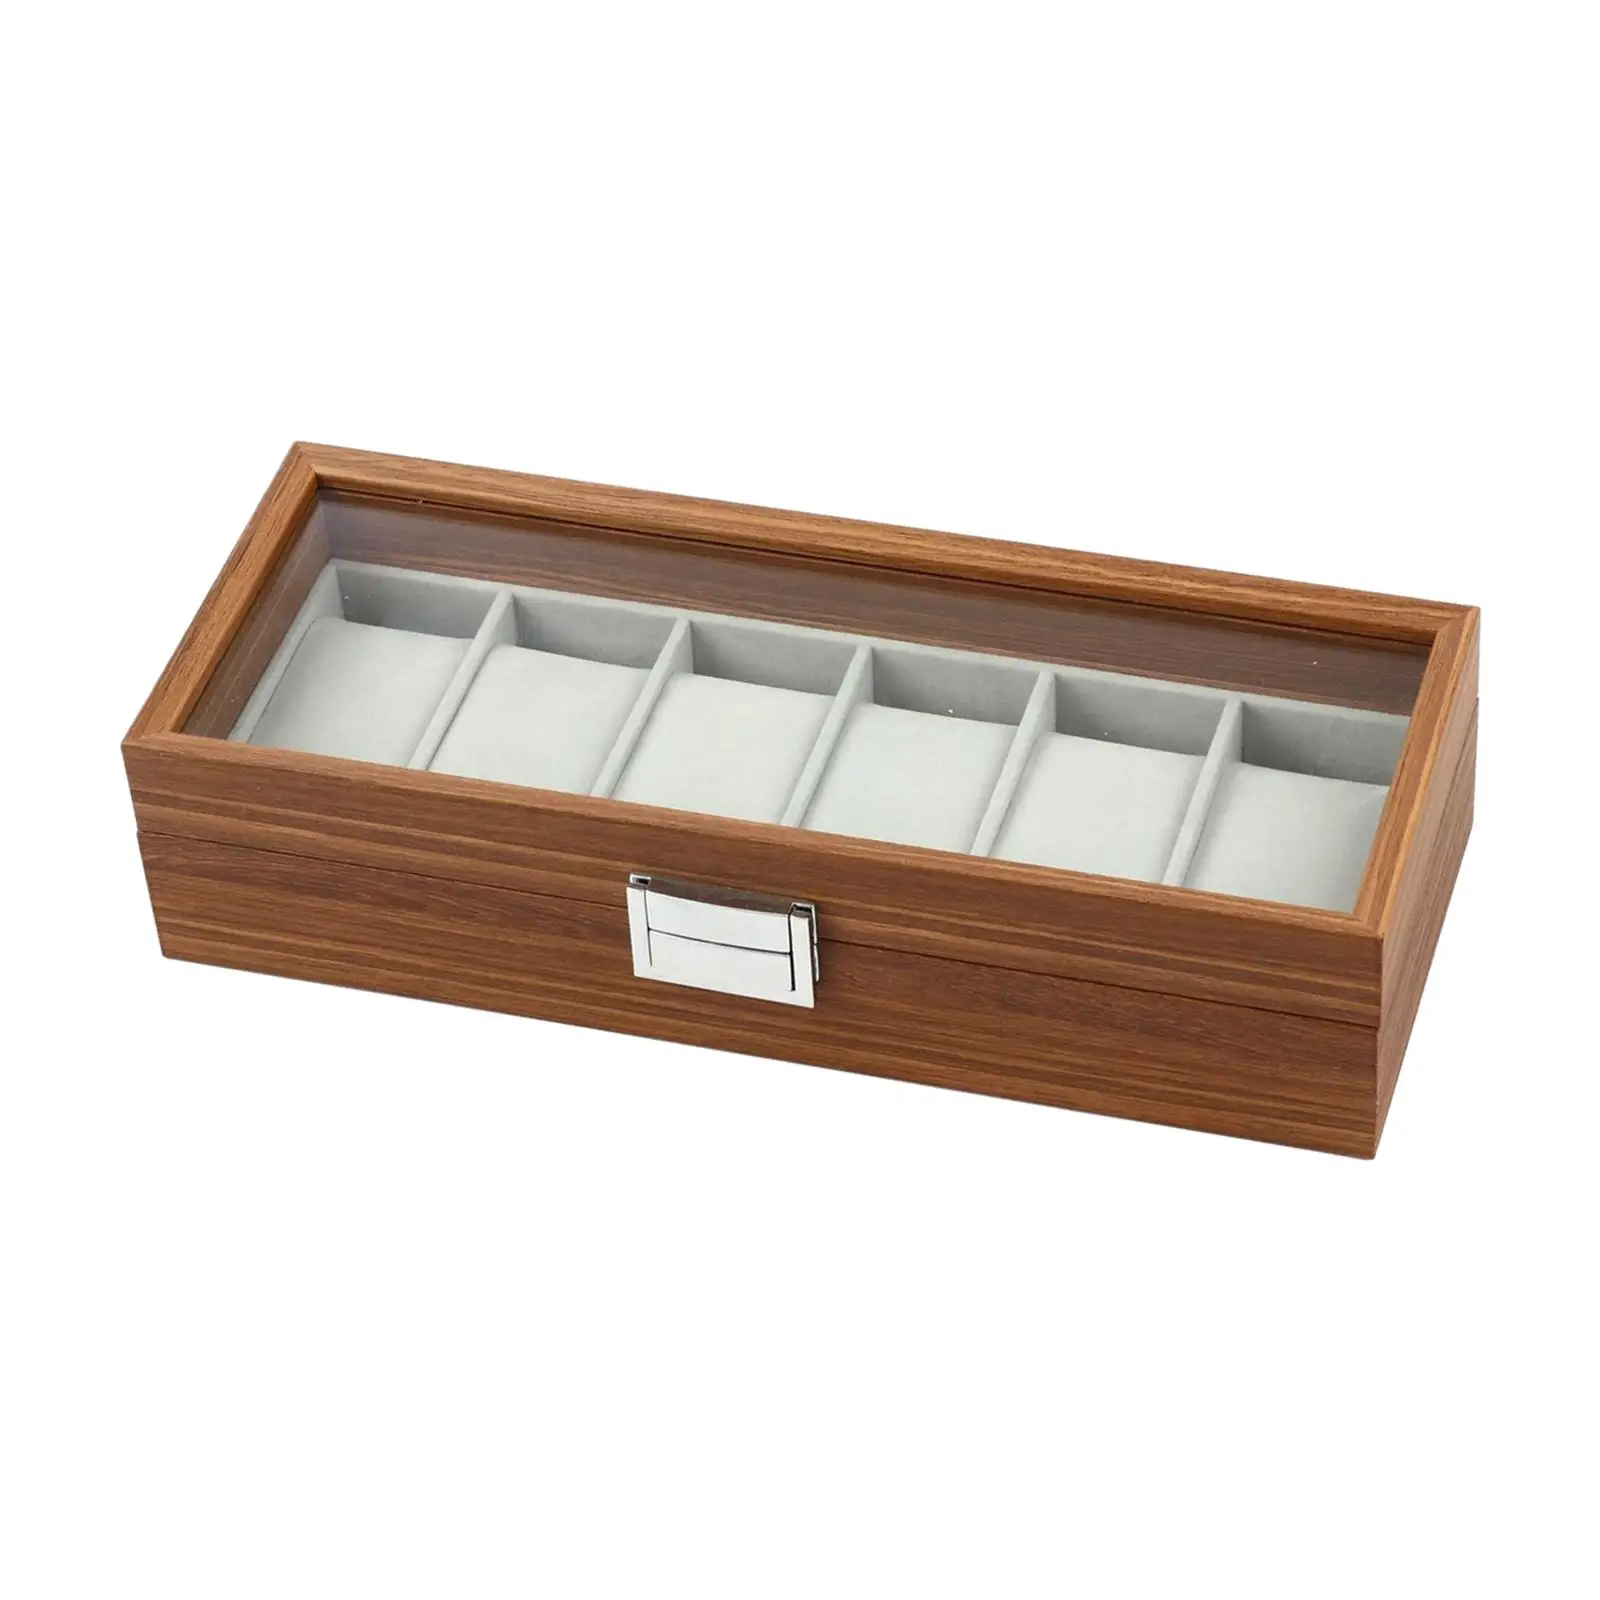 Watch Box Organizer 6 Slot Jewelry Display Case for Watches Necklace Bracelet Earrings Men and Women Table Dresser Shop Display